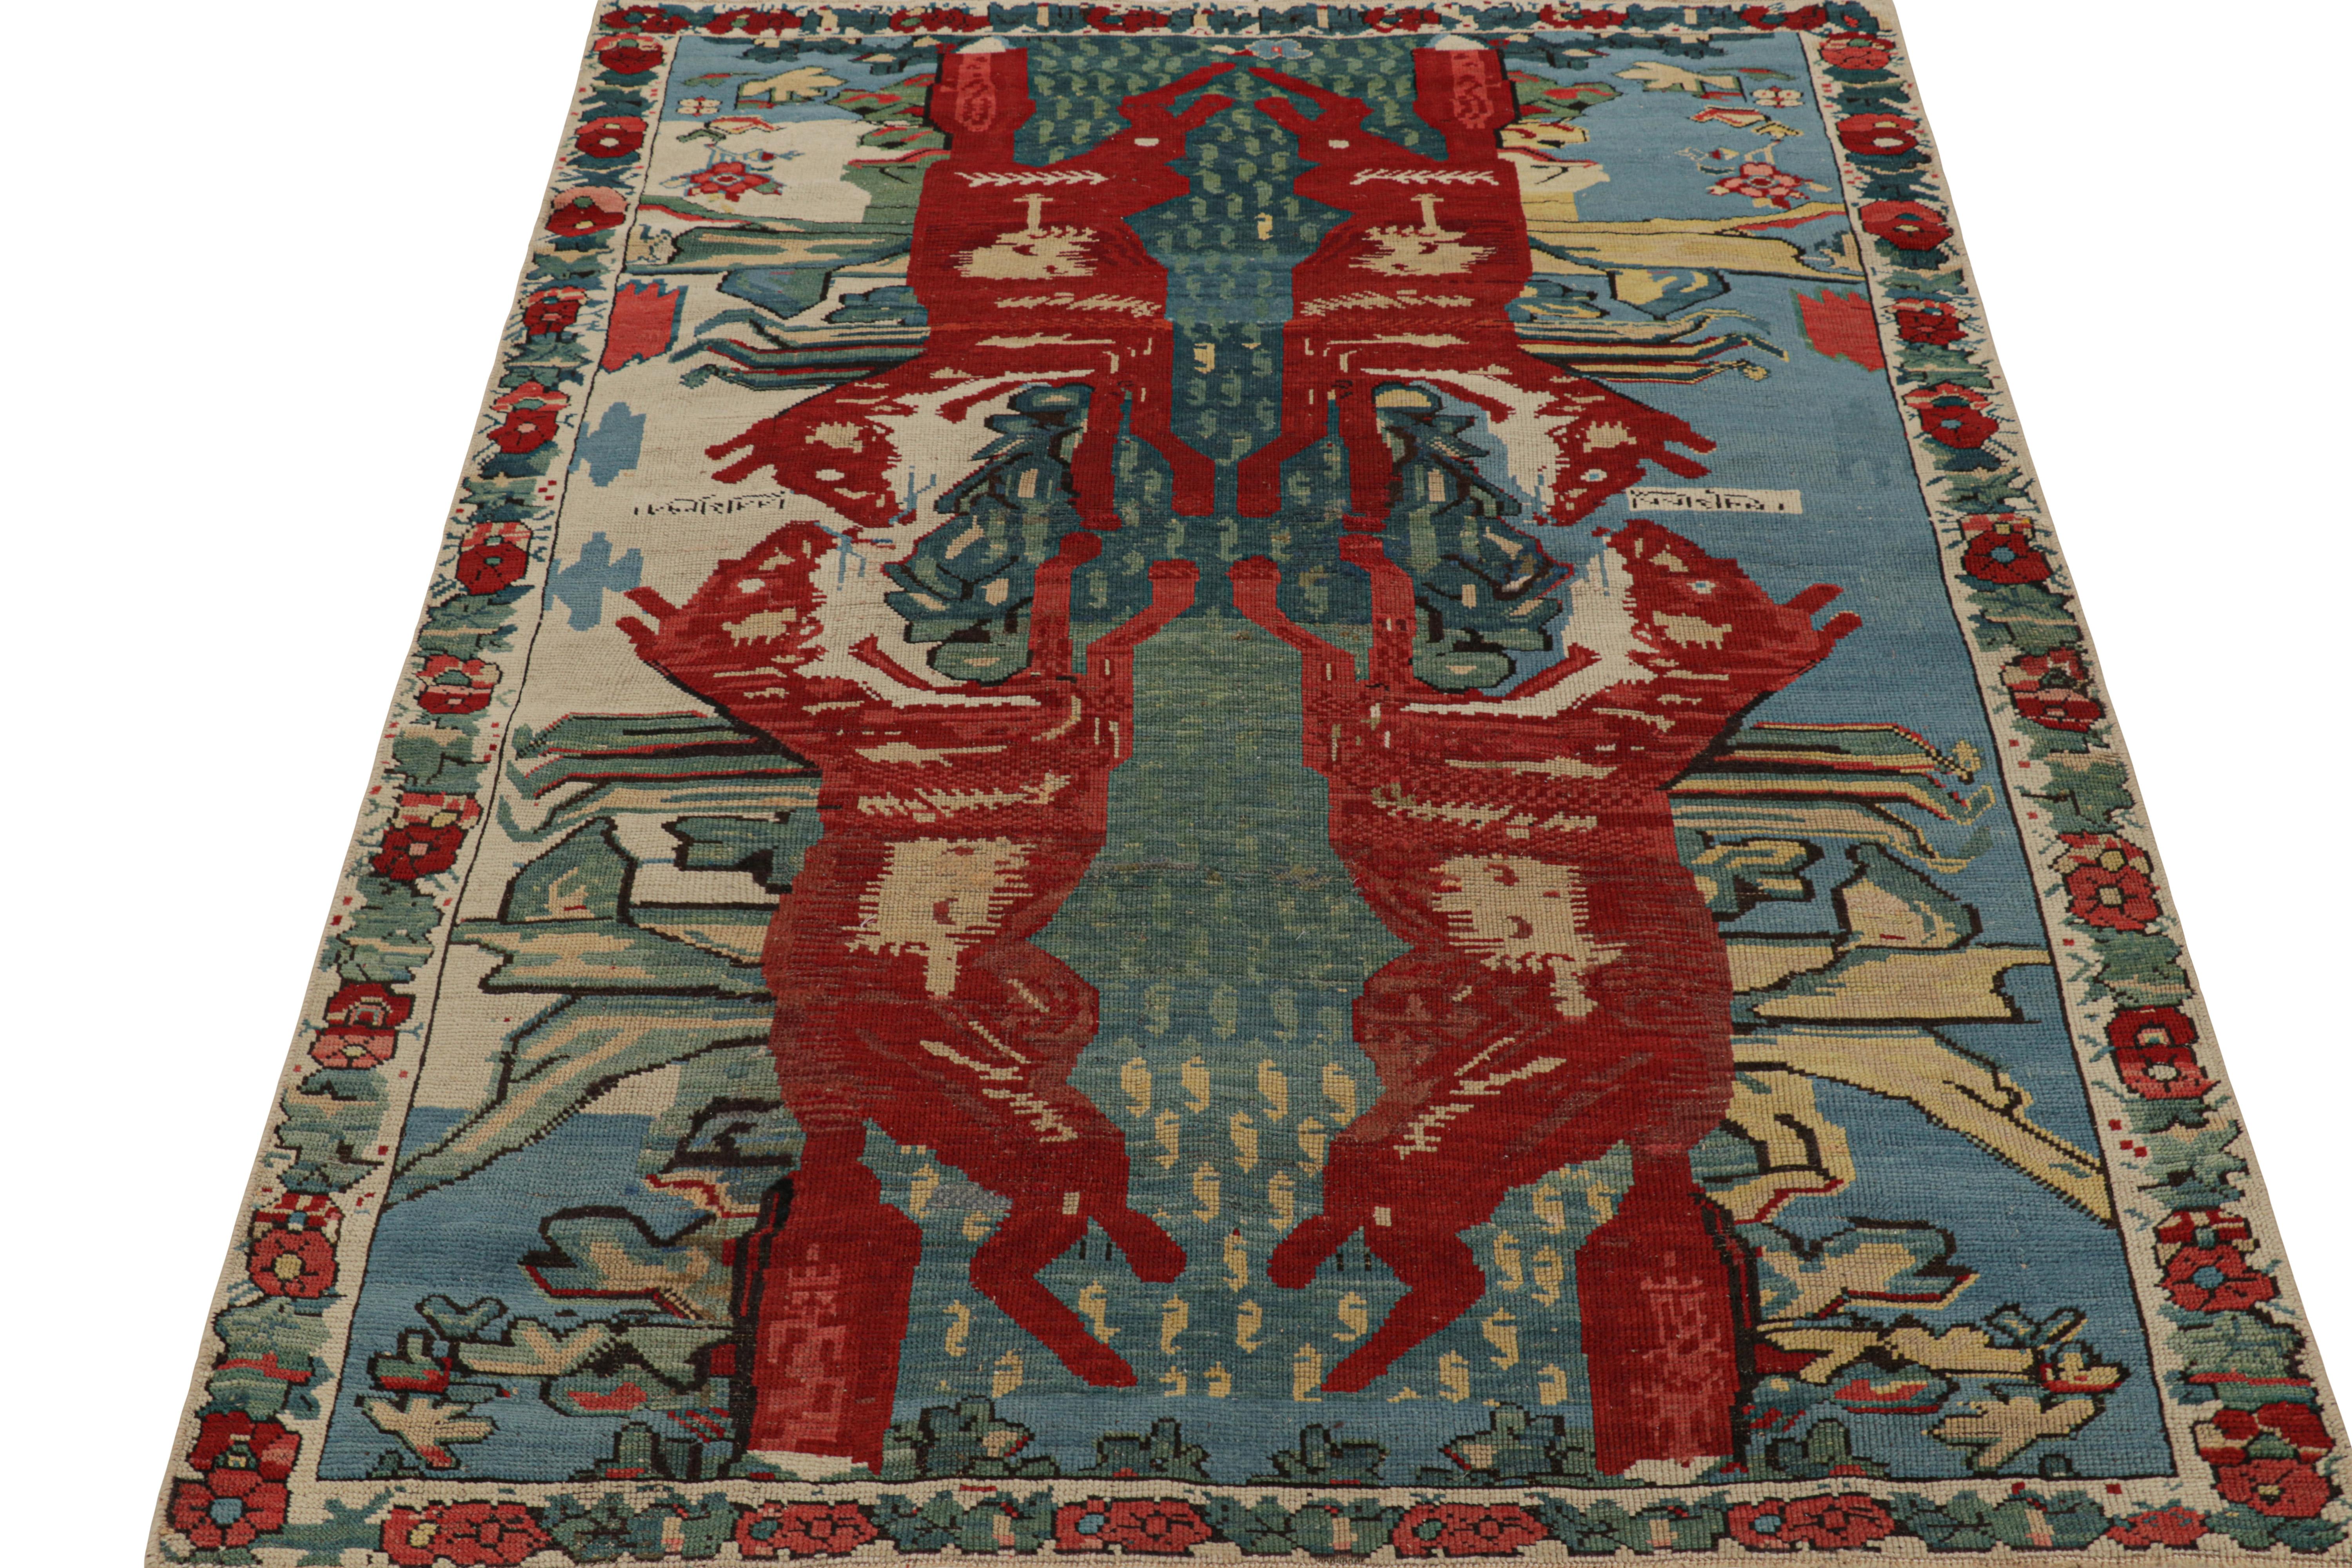 Hand-Knotted Antique Seychour Rug with Fox Pictorials and Floral Patterns, from Rug & Kilim For Sale